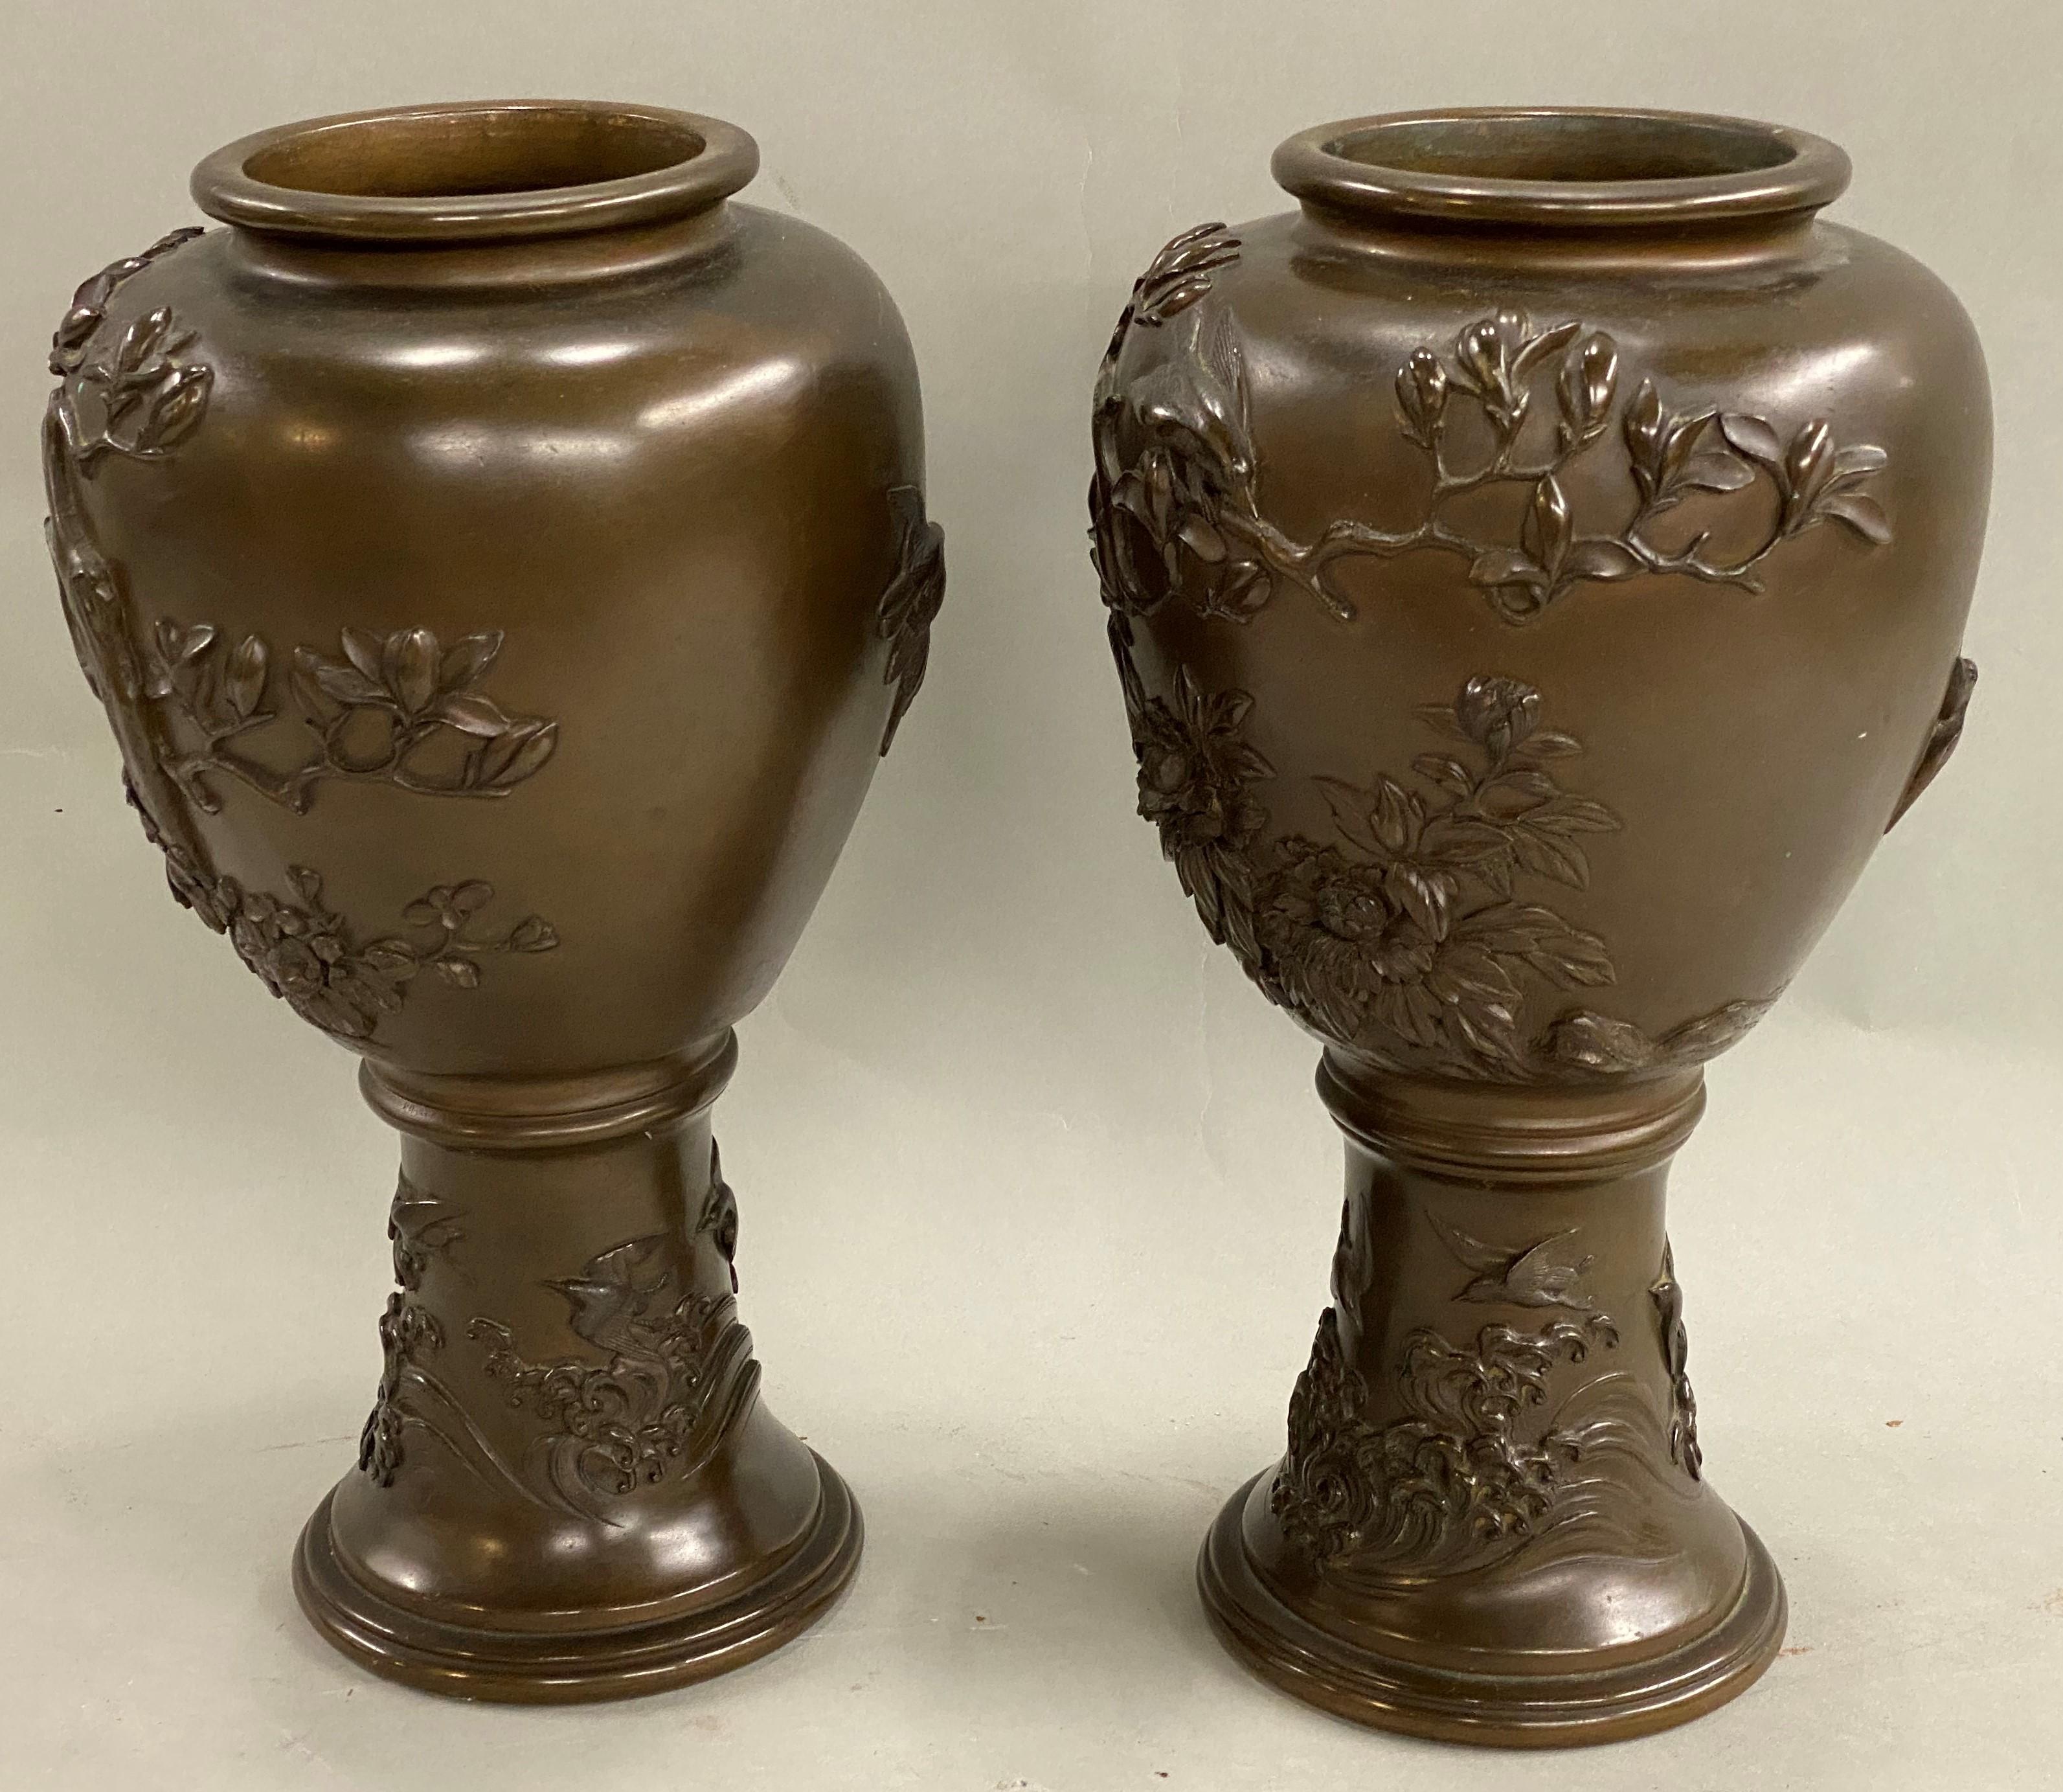 An attractive pair of Japanese Edo Period bronze vases with relief foliate and bird decoration, probably dating to the early 19th century, in very good overall condition, with minimal surface imperfections and wear commensurate with age and use. The